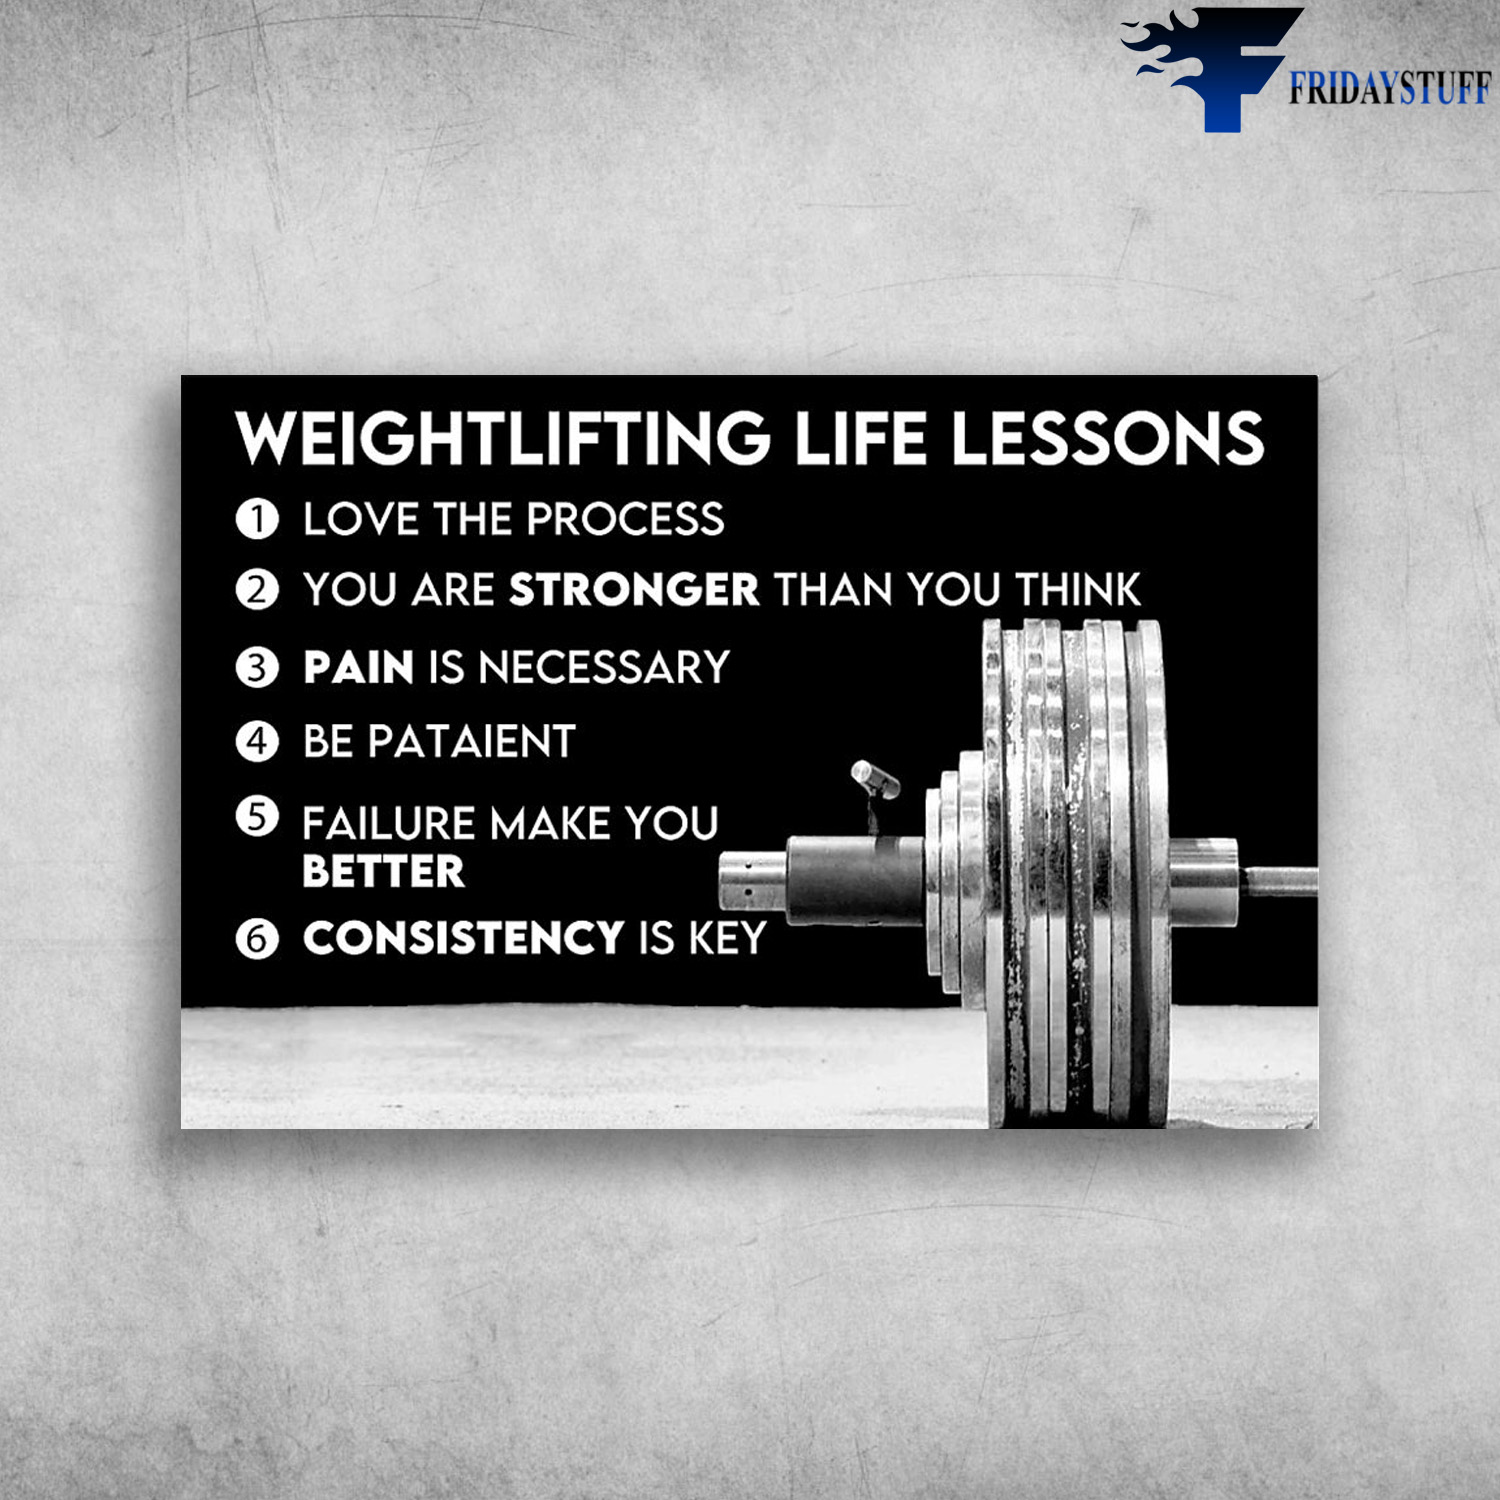 Weightlifting Life Lessons - Love The Process, You Are Stronger Than You Think, Pain Is Necessary, Be Pataient, Failure Make You Better, Consistency Is Key